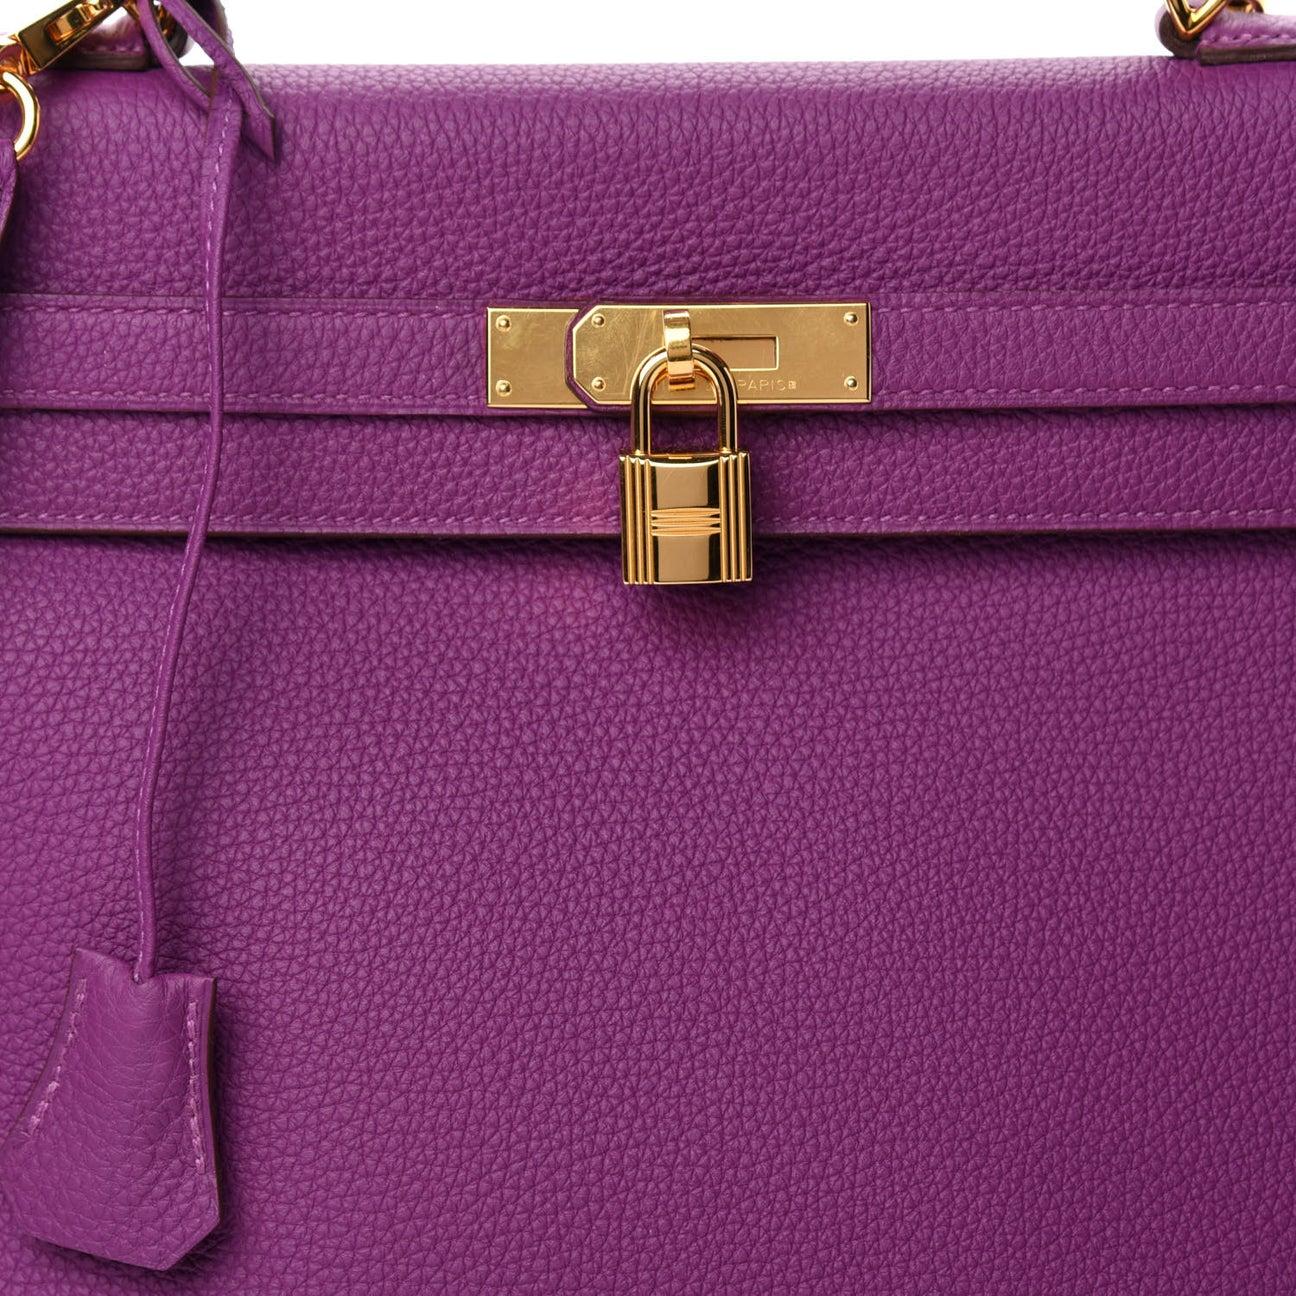 Pre-Owned Condition
From 2014 Collection
Anemone
Togo Leather
Gold Hardware
Measures 13.75